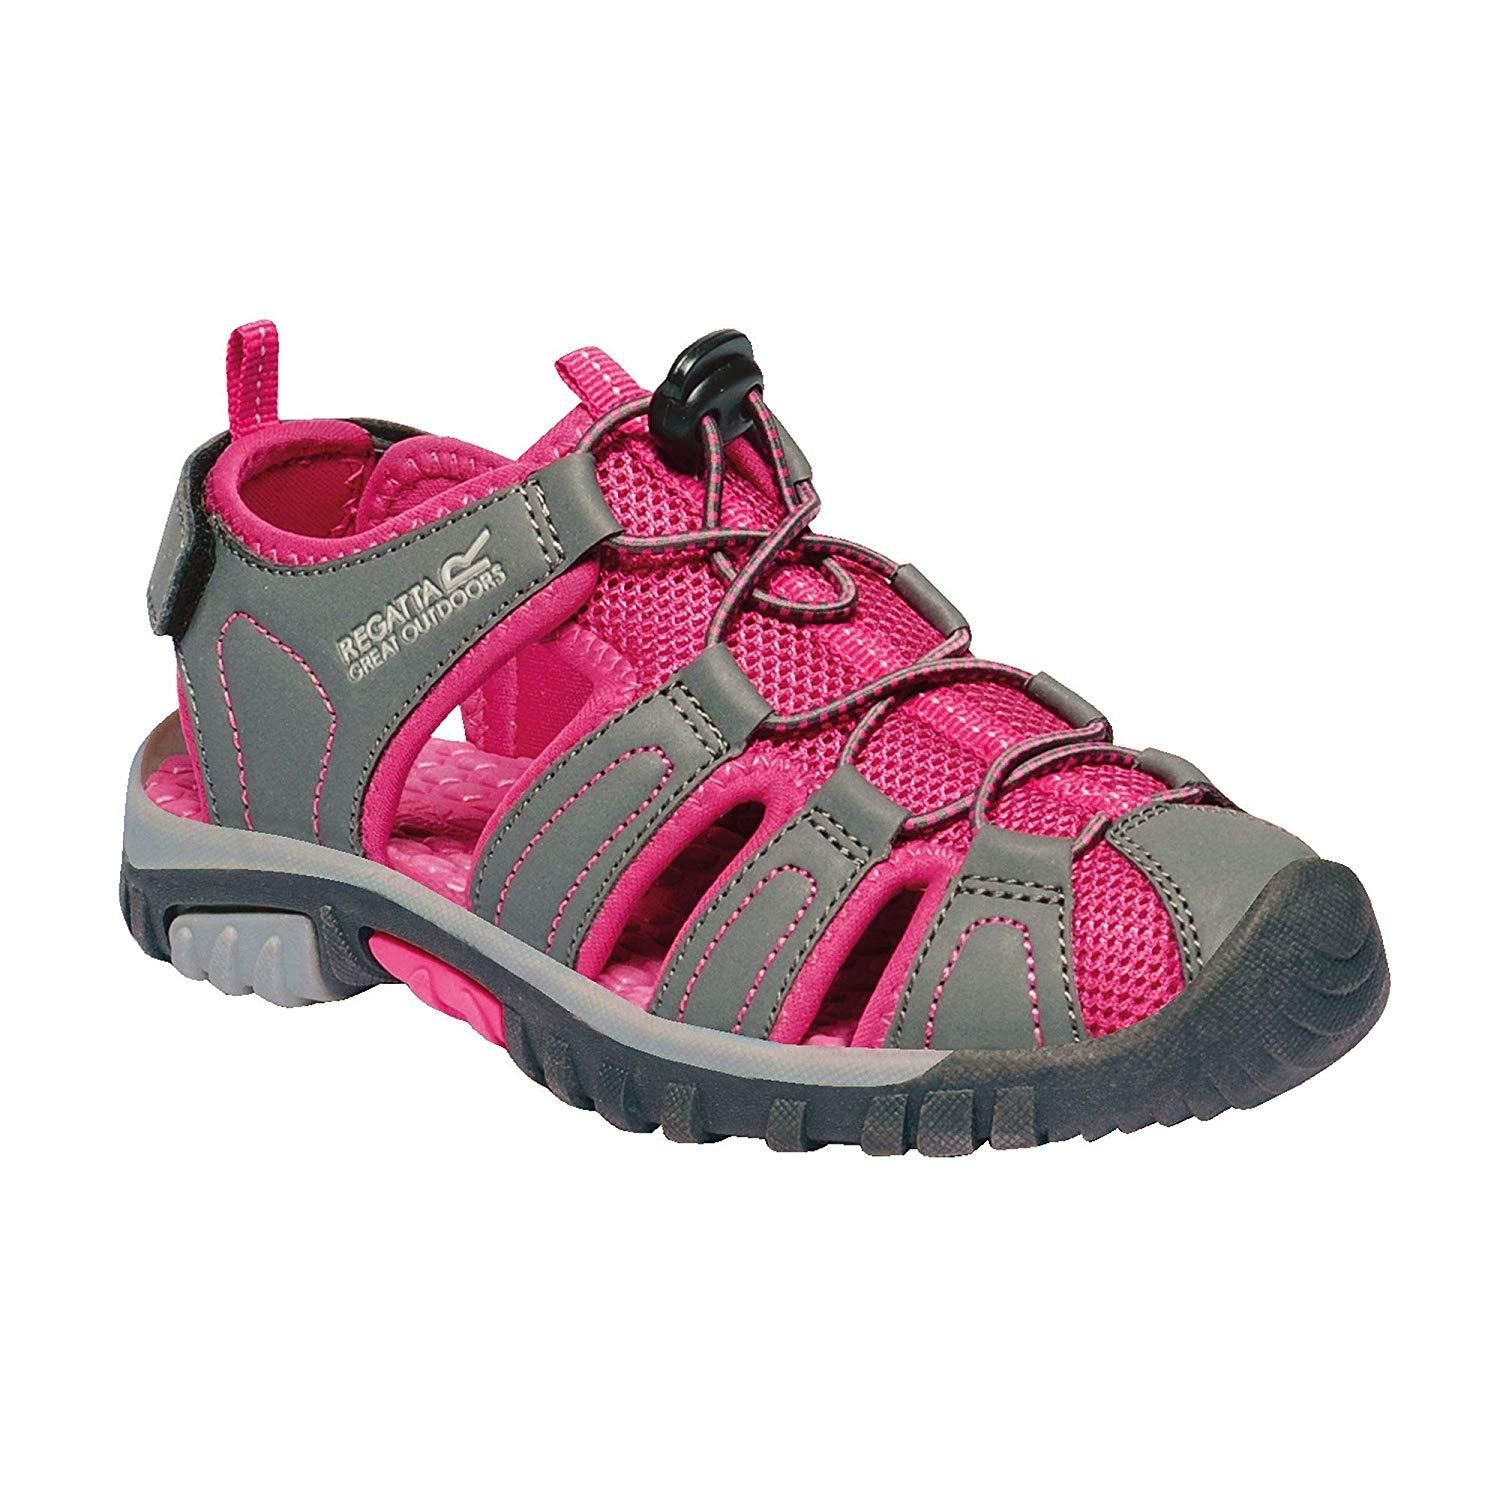 90% polyurathane, 10% polyester. PU nubuck and breathable mesh upper. Spandex lining for extra comfort and a positive fit. Adjustable shockcord fastening system. Adjustable hook and loop strap across heel to ensure correct fit. Durable protective toe bumper. Water friendly comfort EVA footbed. Lightweight TPR outsole - hardwearing slip resistant durable outsole.